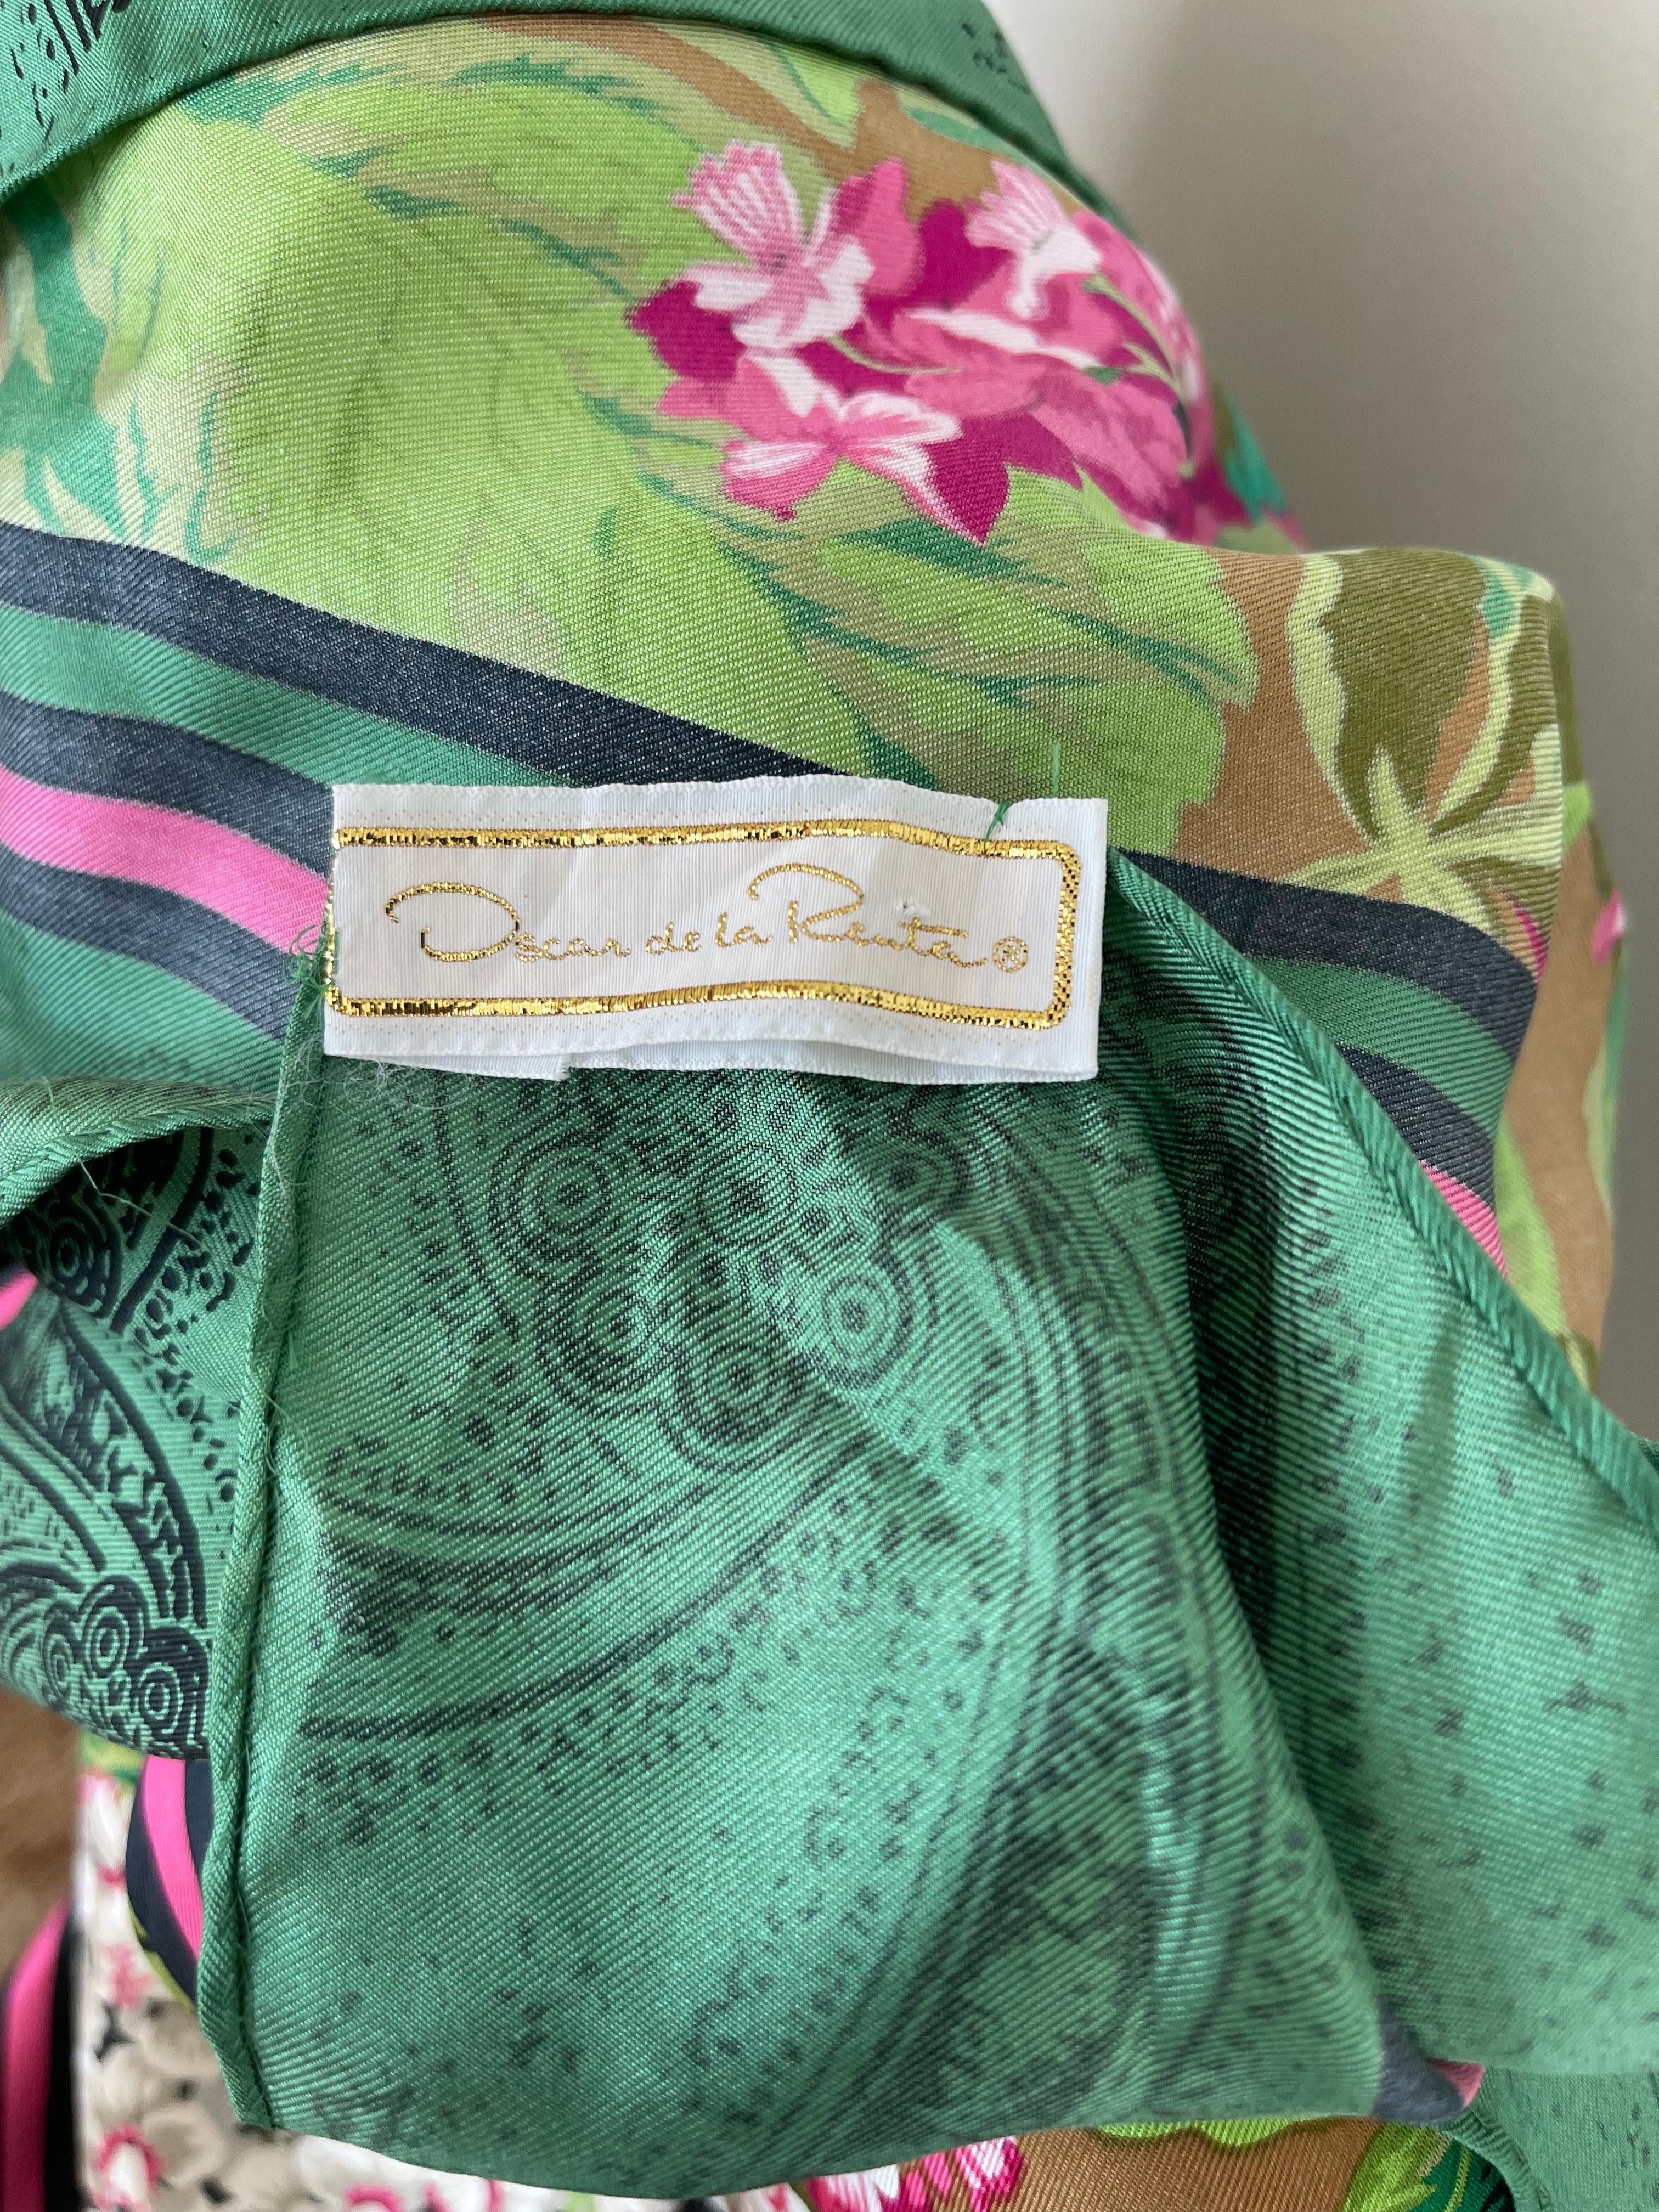 1990s OSCAR DE LA RENTA Gold Collection silk scarf ! Vibrant colors of greens, pinks and black. Paisley edge and center with hydrangea flowers in between. Hand rolled edges. Can be worn many different ways. Wrap it around the shoulder for a shawl,